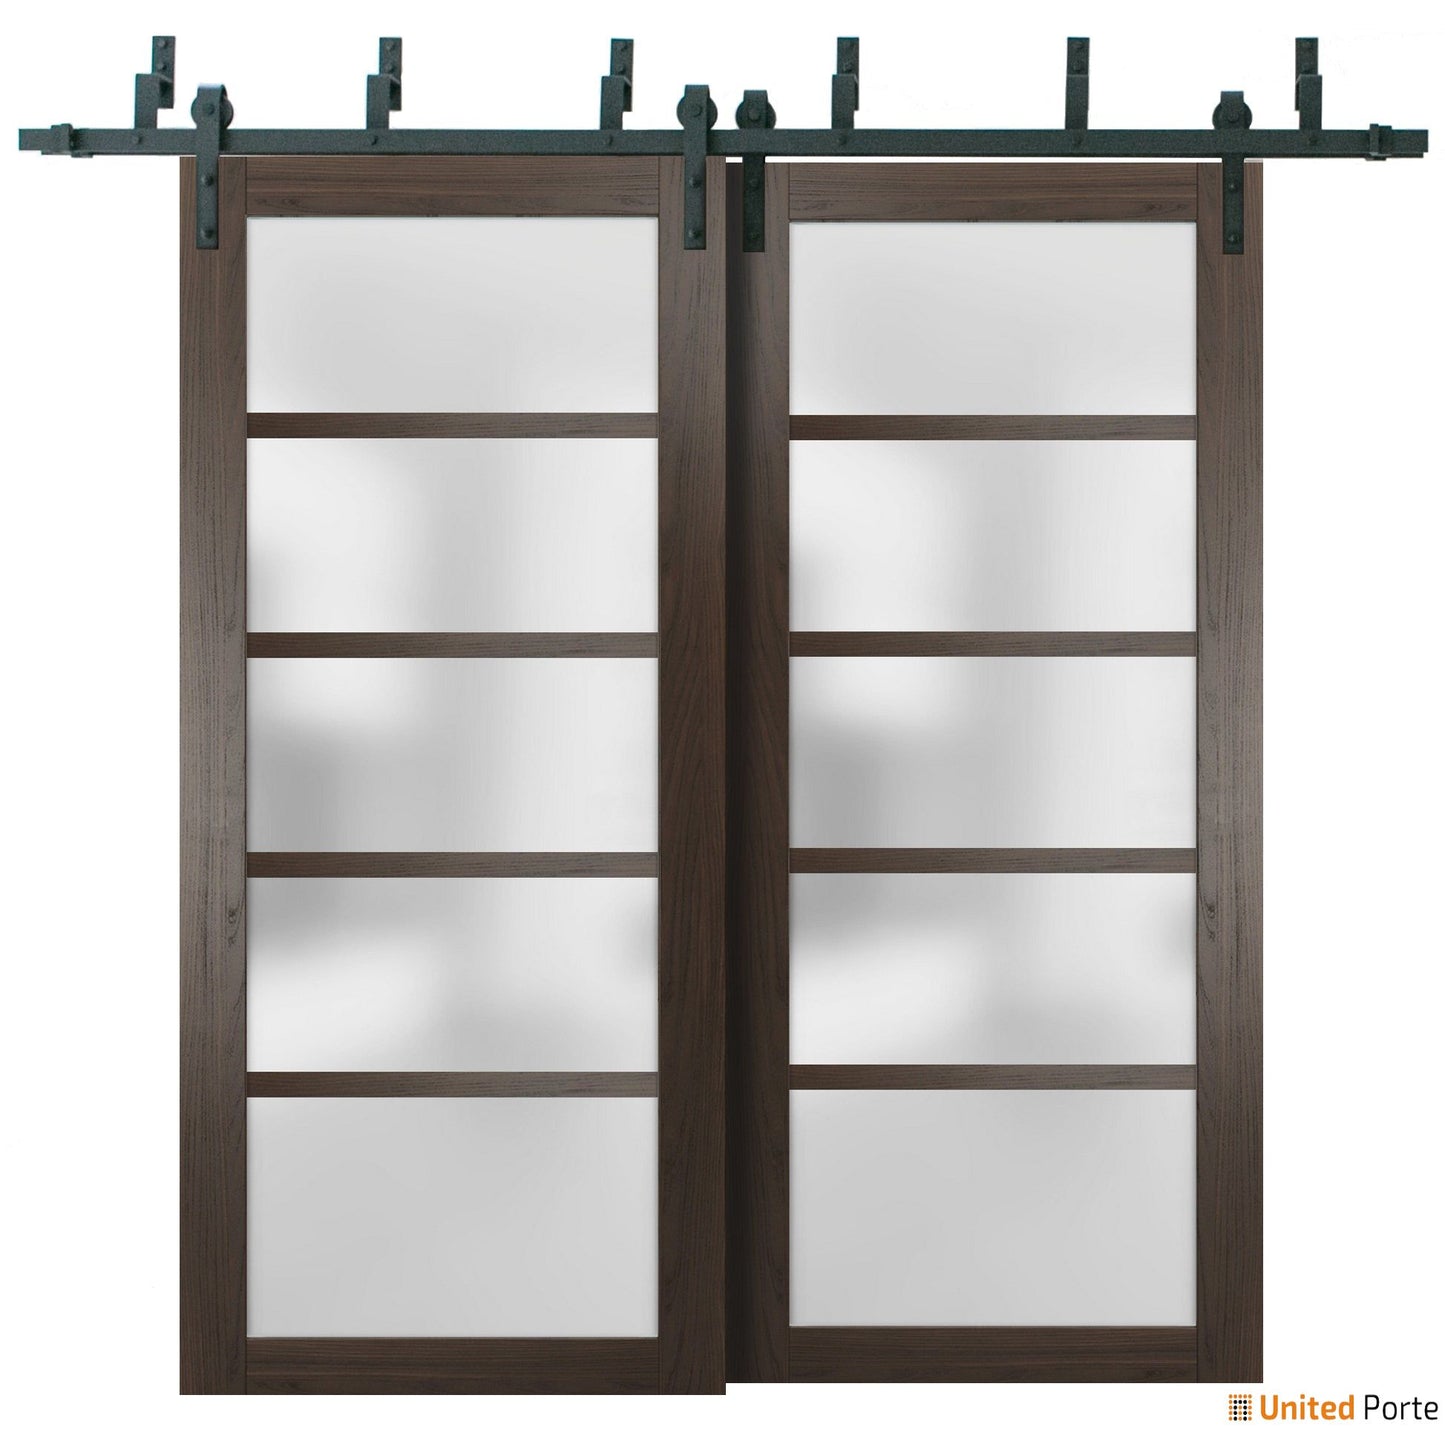 Quadro 4002 Chocolate Ash Double Barn Door with Frosted Glass and Black Bypass Rail